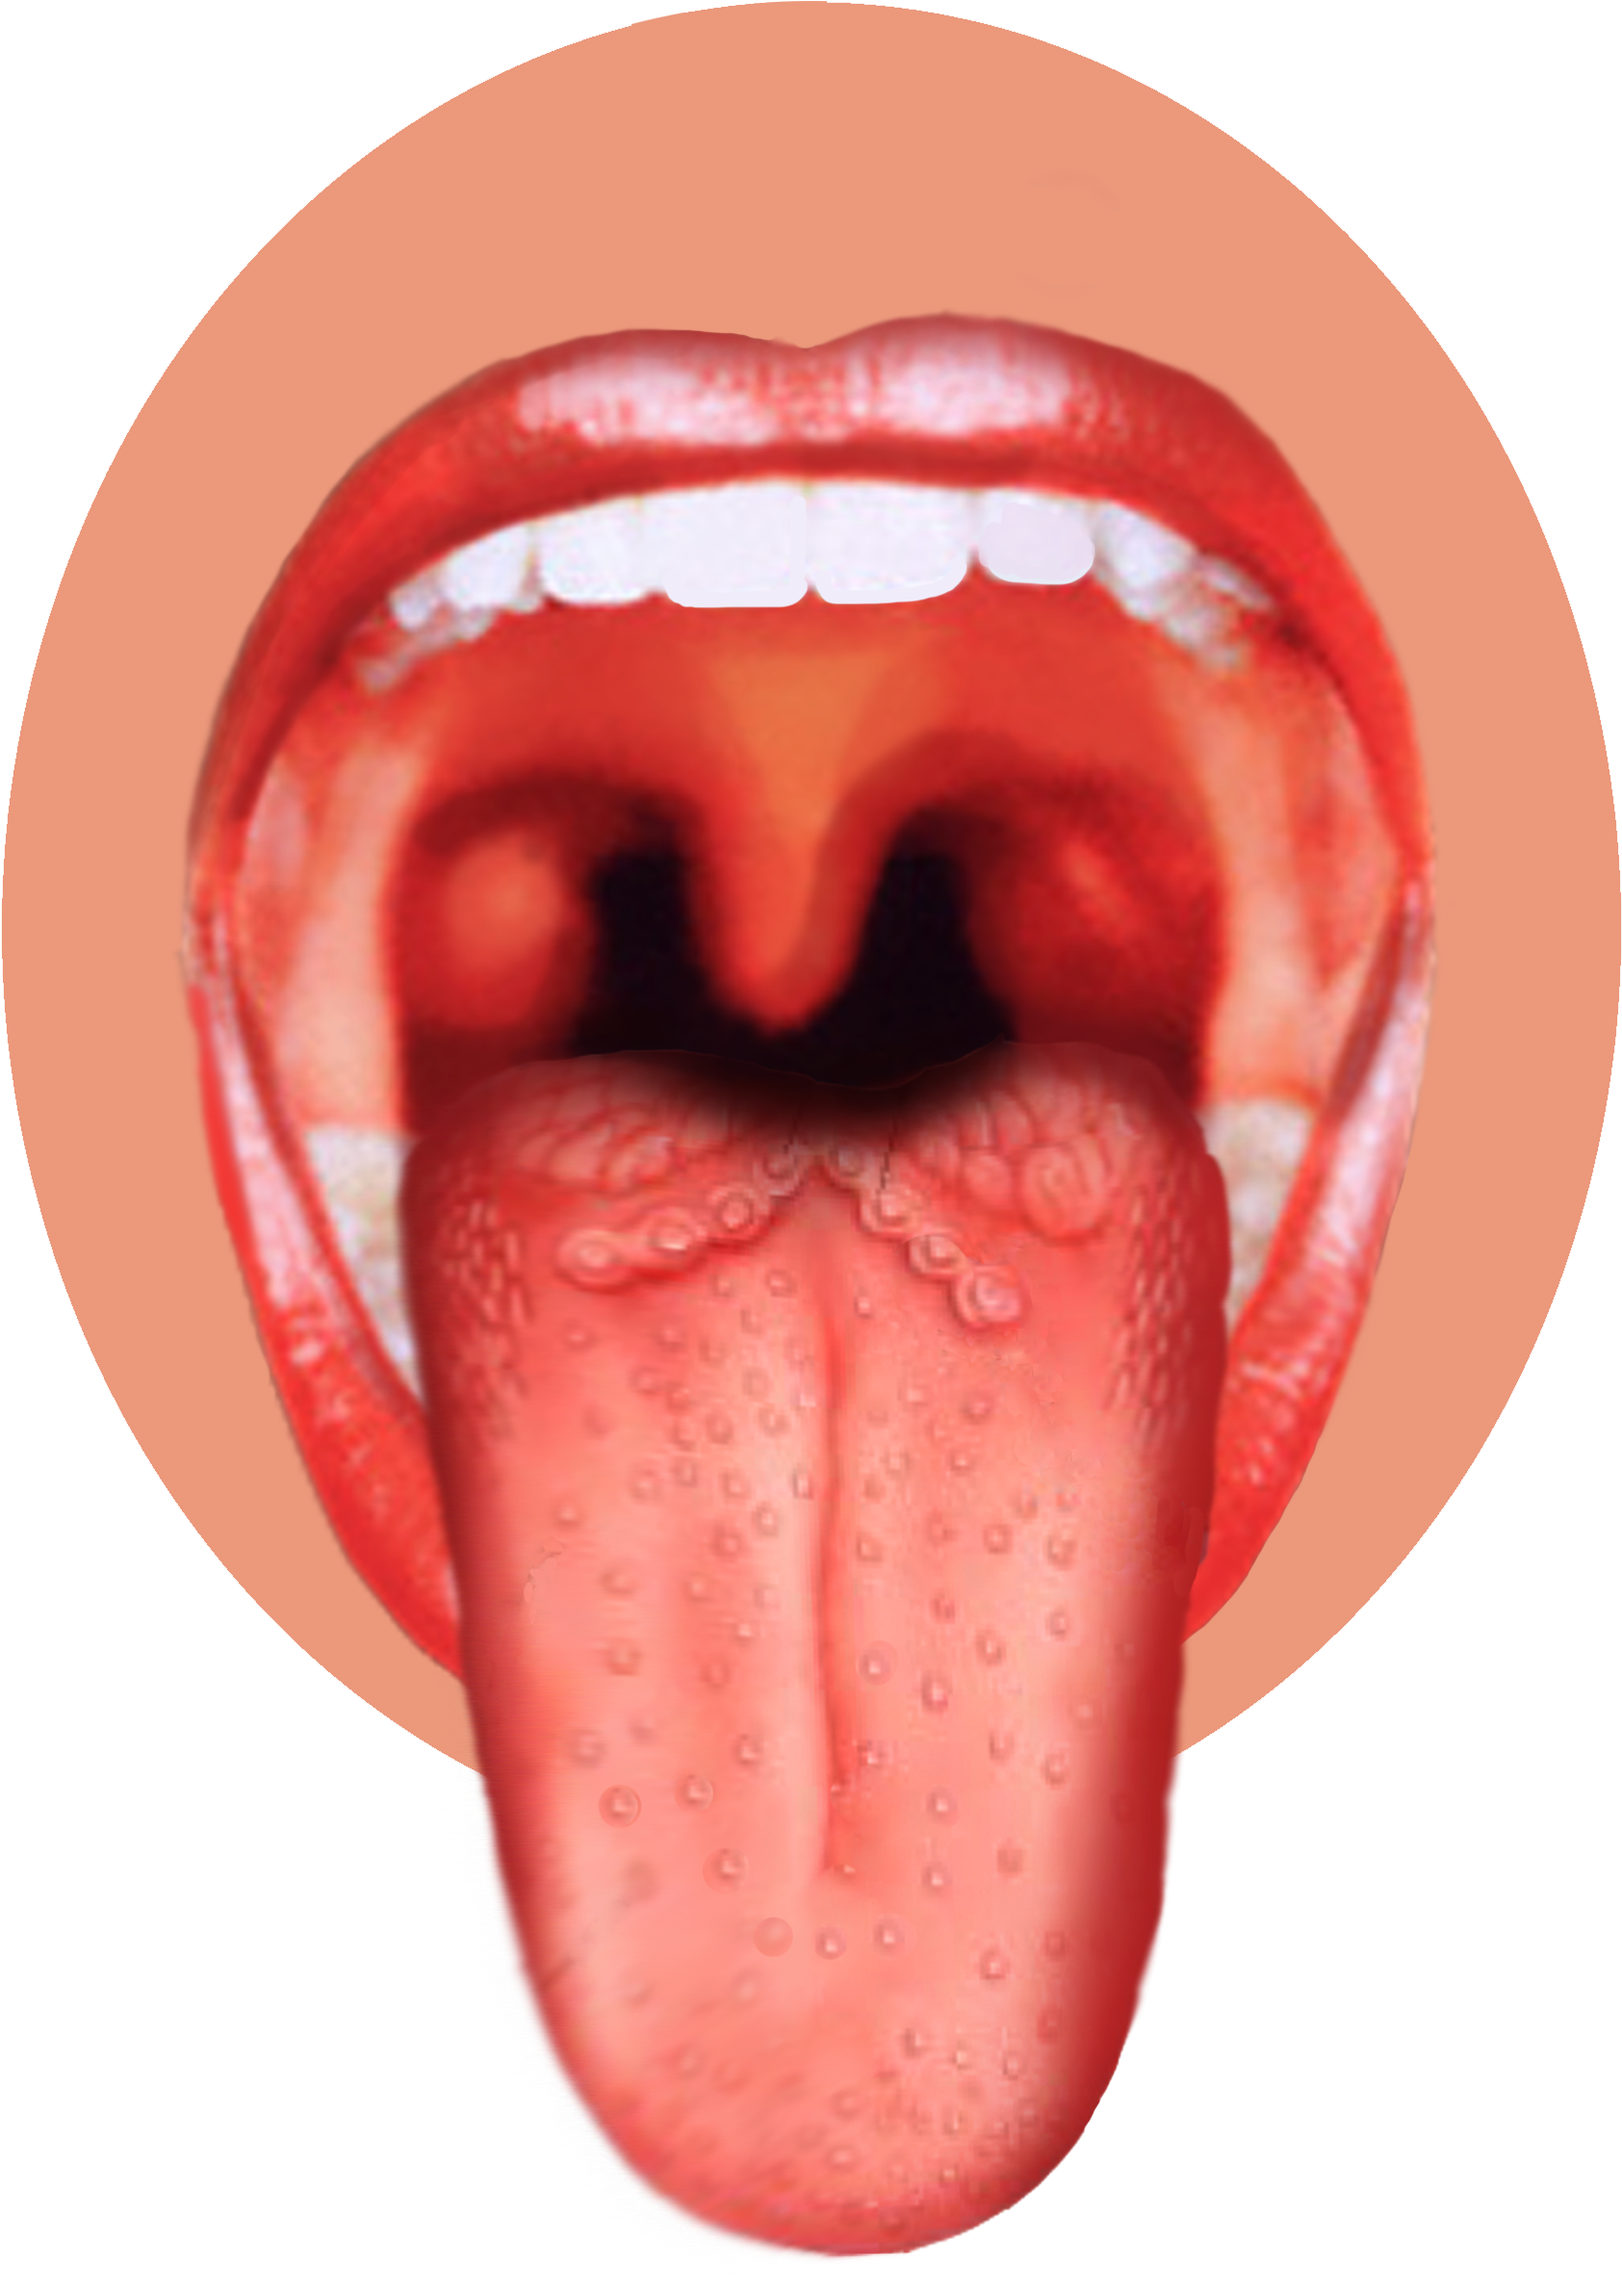 A Close Up Of A Person's Mouth And Tongue